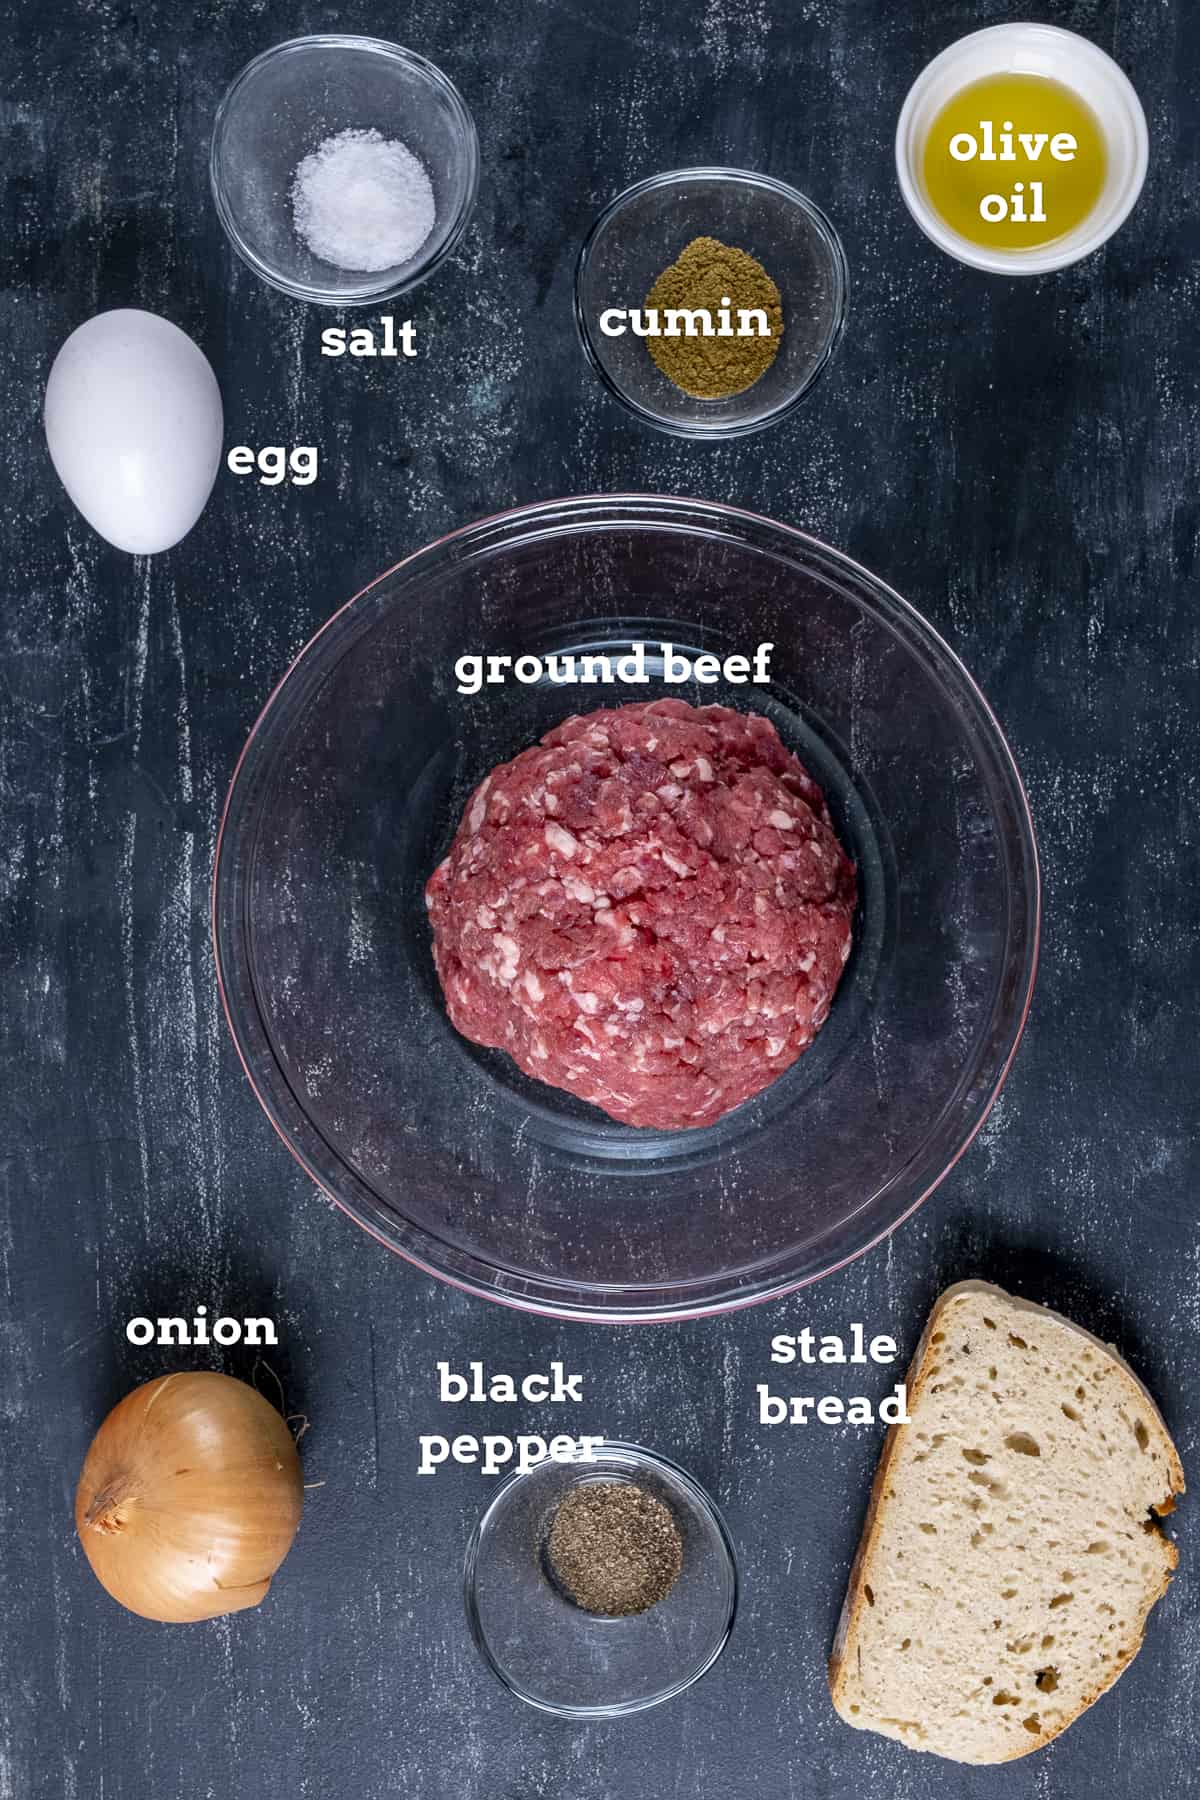 Ground beef, egg, onion, a slice of bread, olive oil, spices on a dark background.